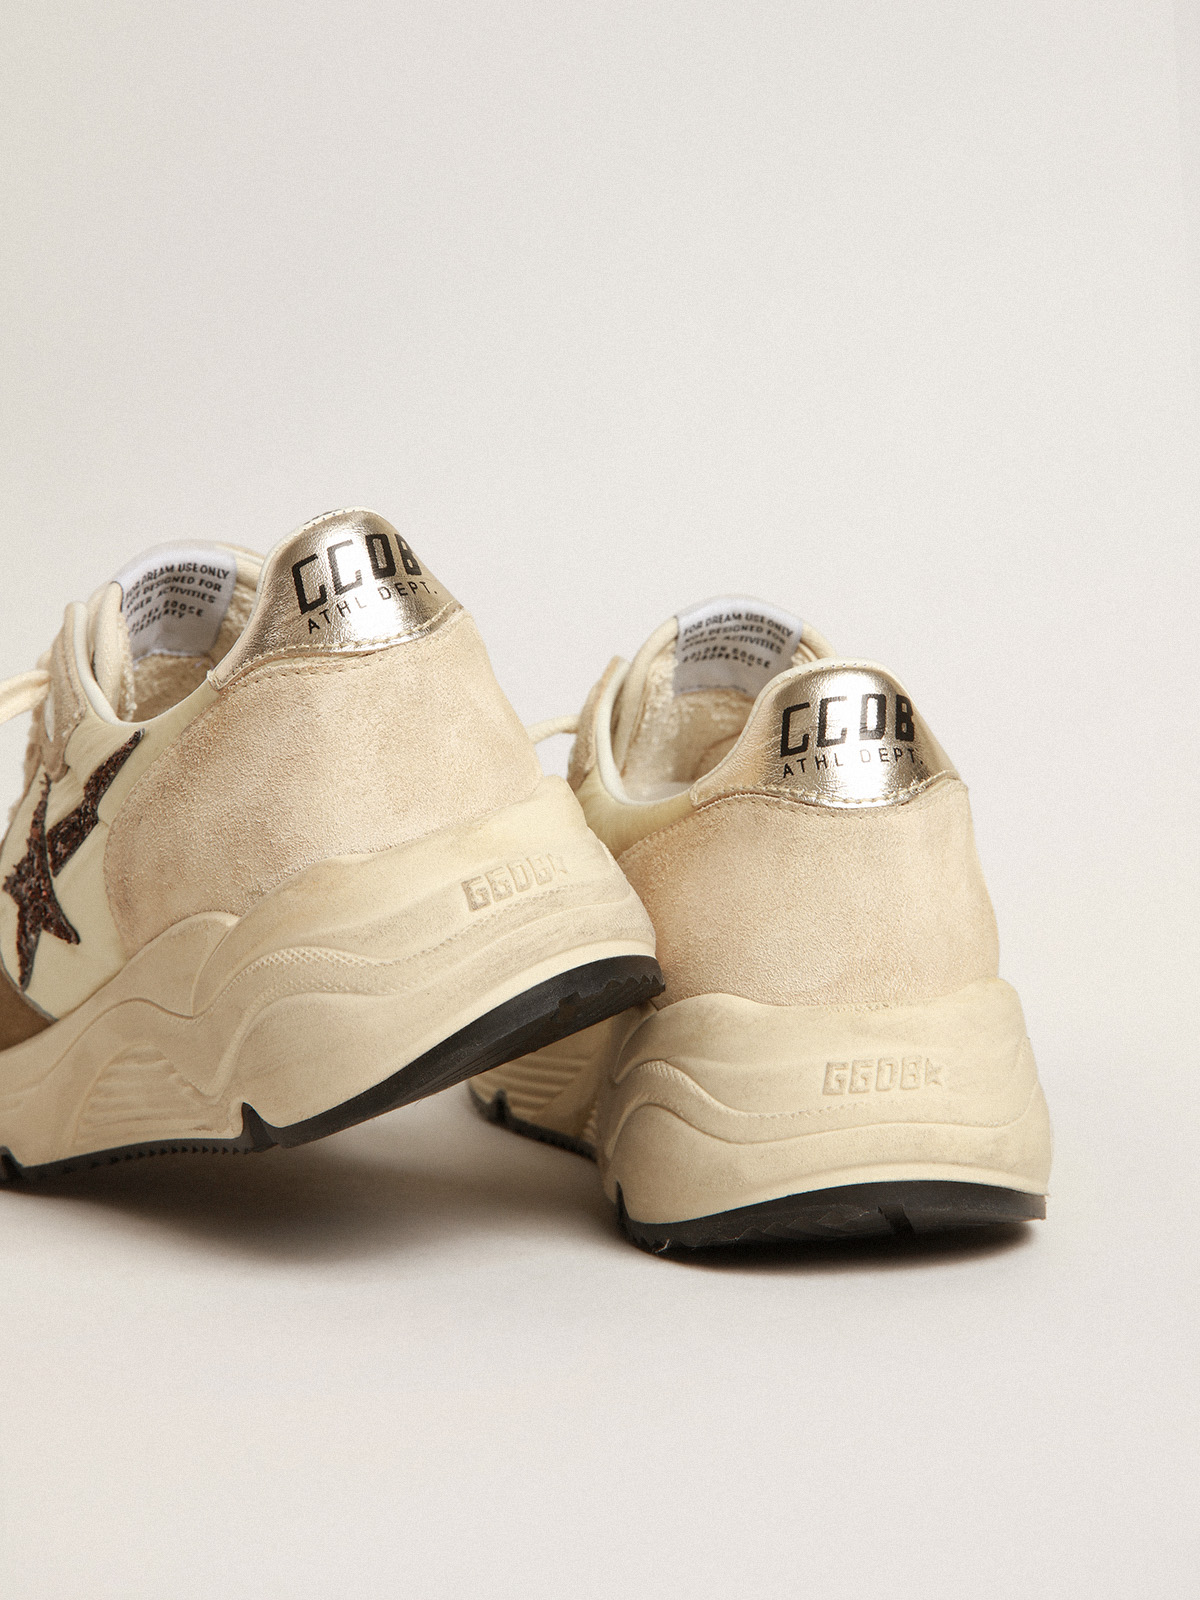 Running Sole LTD in cream nylon and suede with a glitter star | Golden Goose